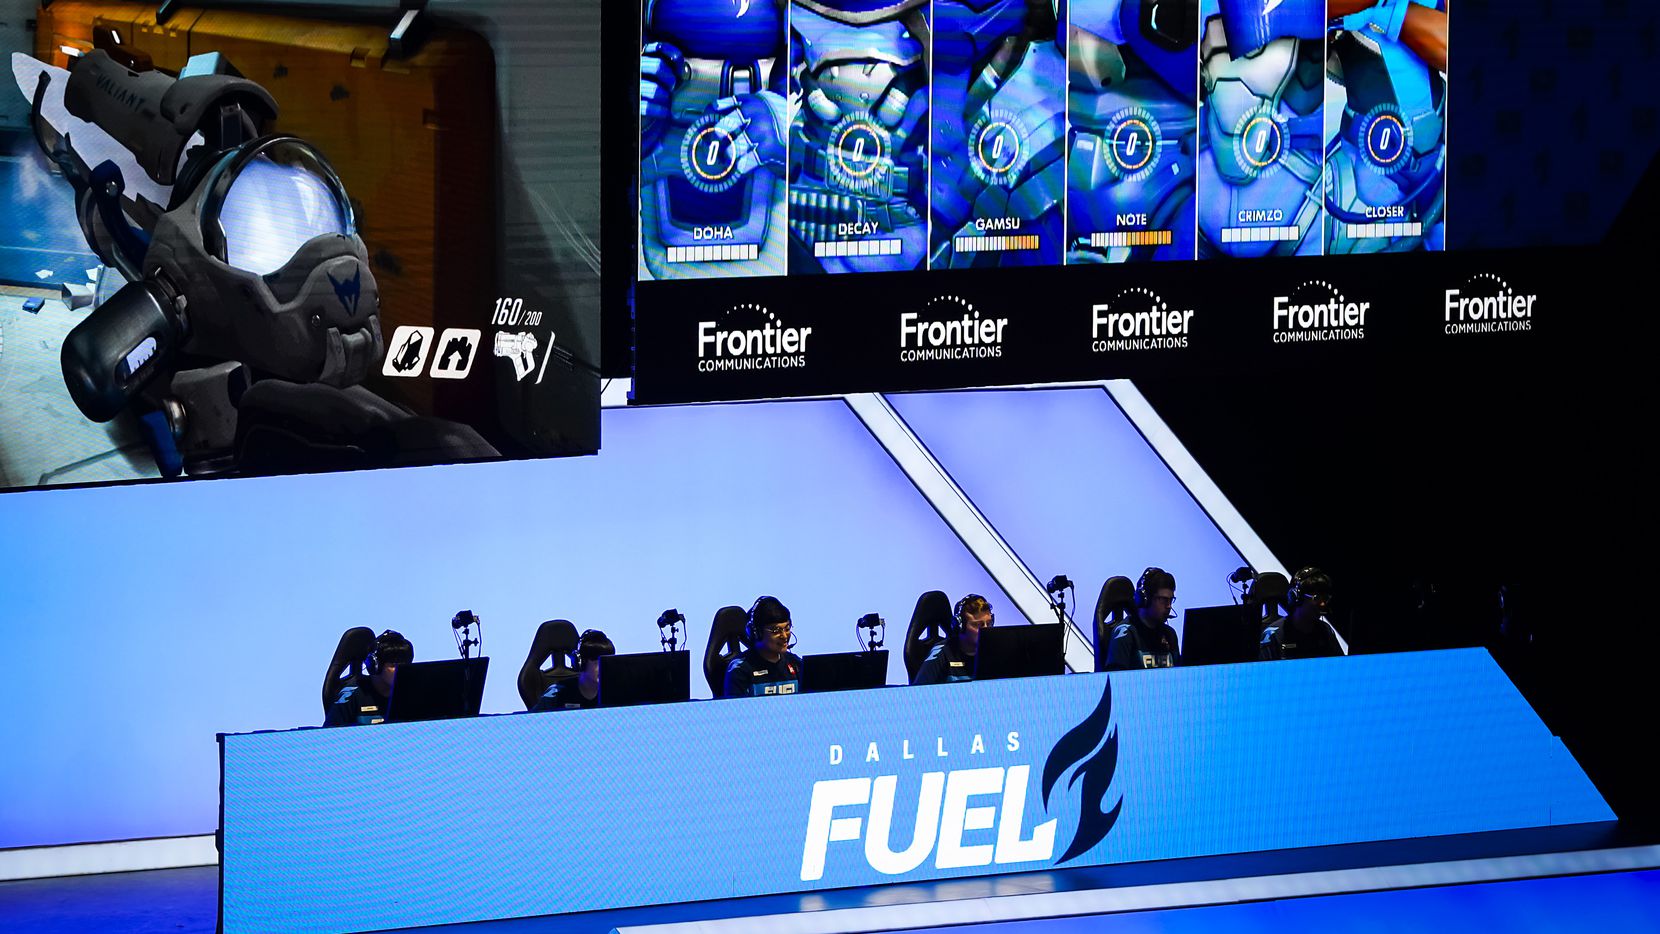 From left, Dallas Fuel players Kim "DoHa" Dongha, Jang "Decay" Gui-un, Noh "Gamsu" Youngjin,...